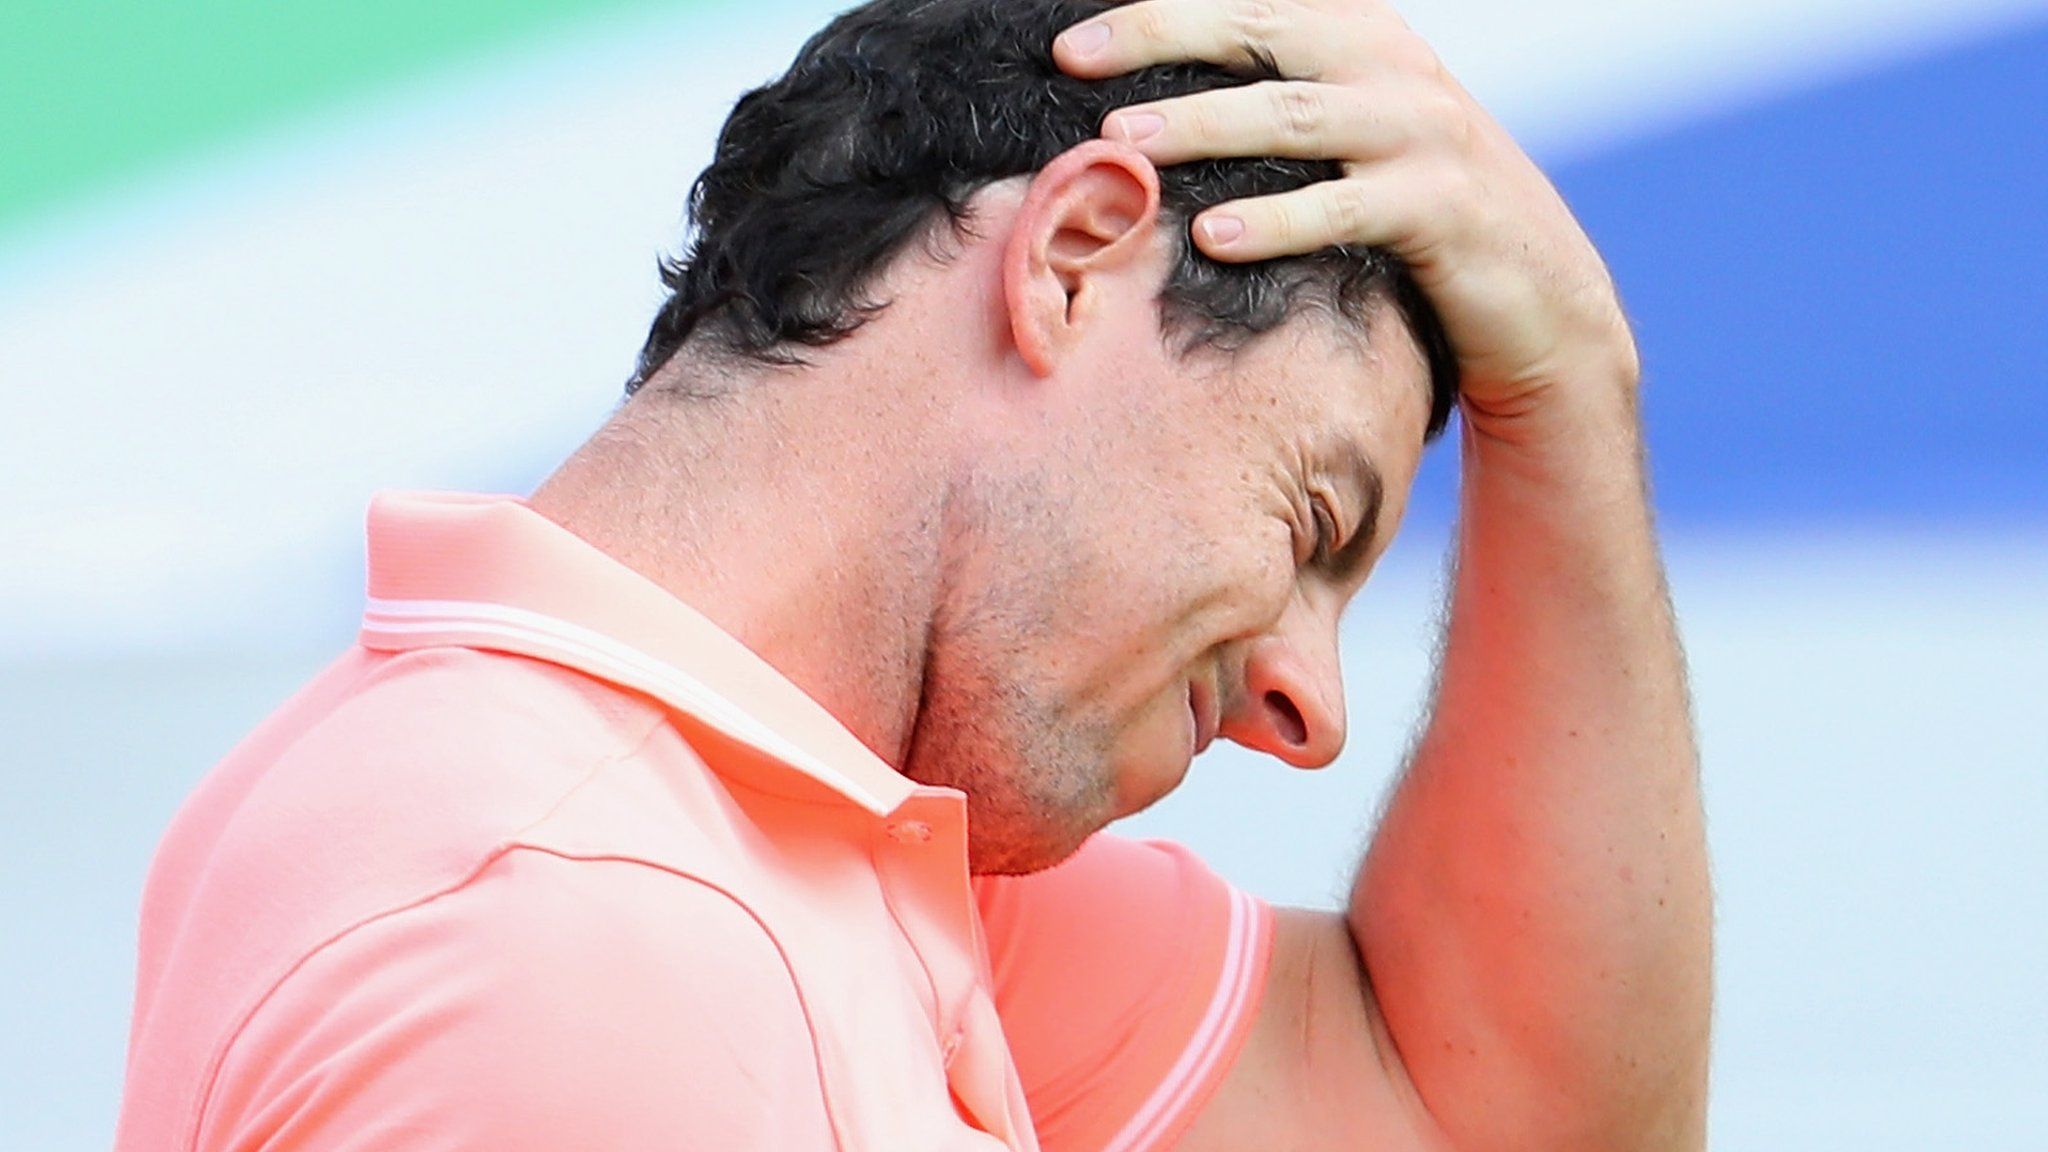 Rory McIlroy lost to England's Graeme Storm in a play-off for the South Africa Open